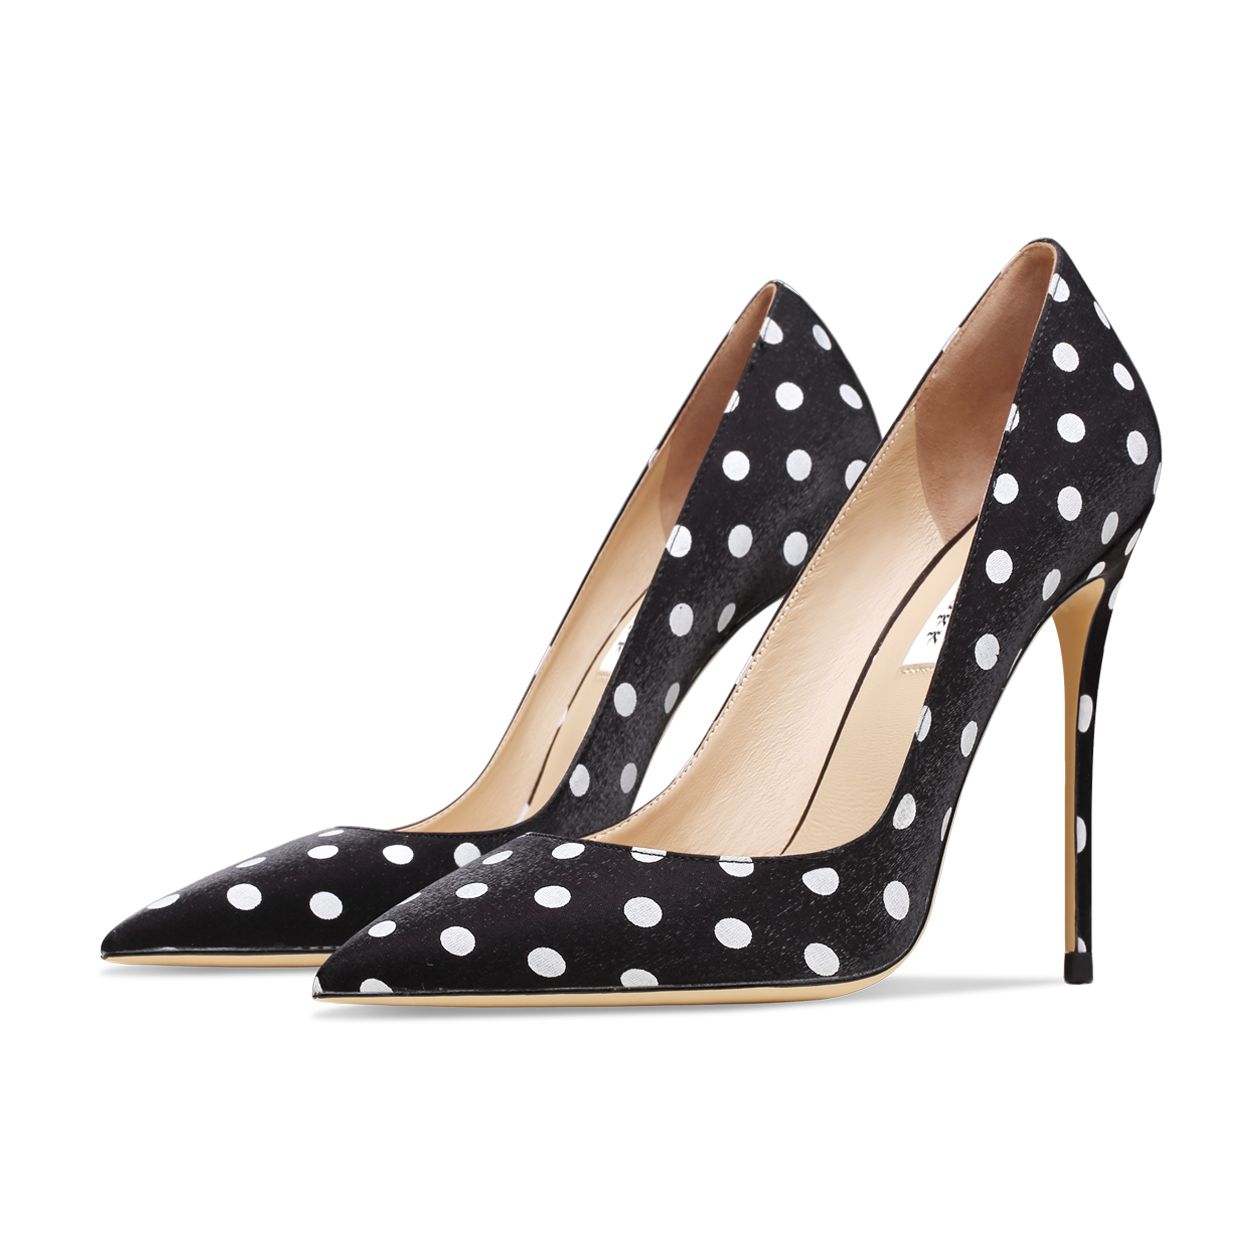 2022 New Spring Genuine Leather Polka Dot Pointed Toe High Heels Shallow Fashion Pumps Black Silk Women's Shoes Dress Shoes 10cm